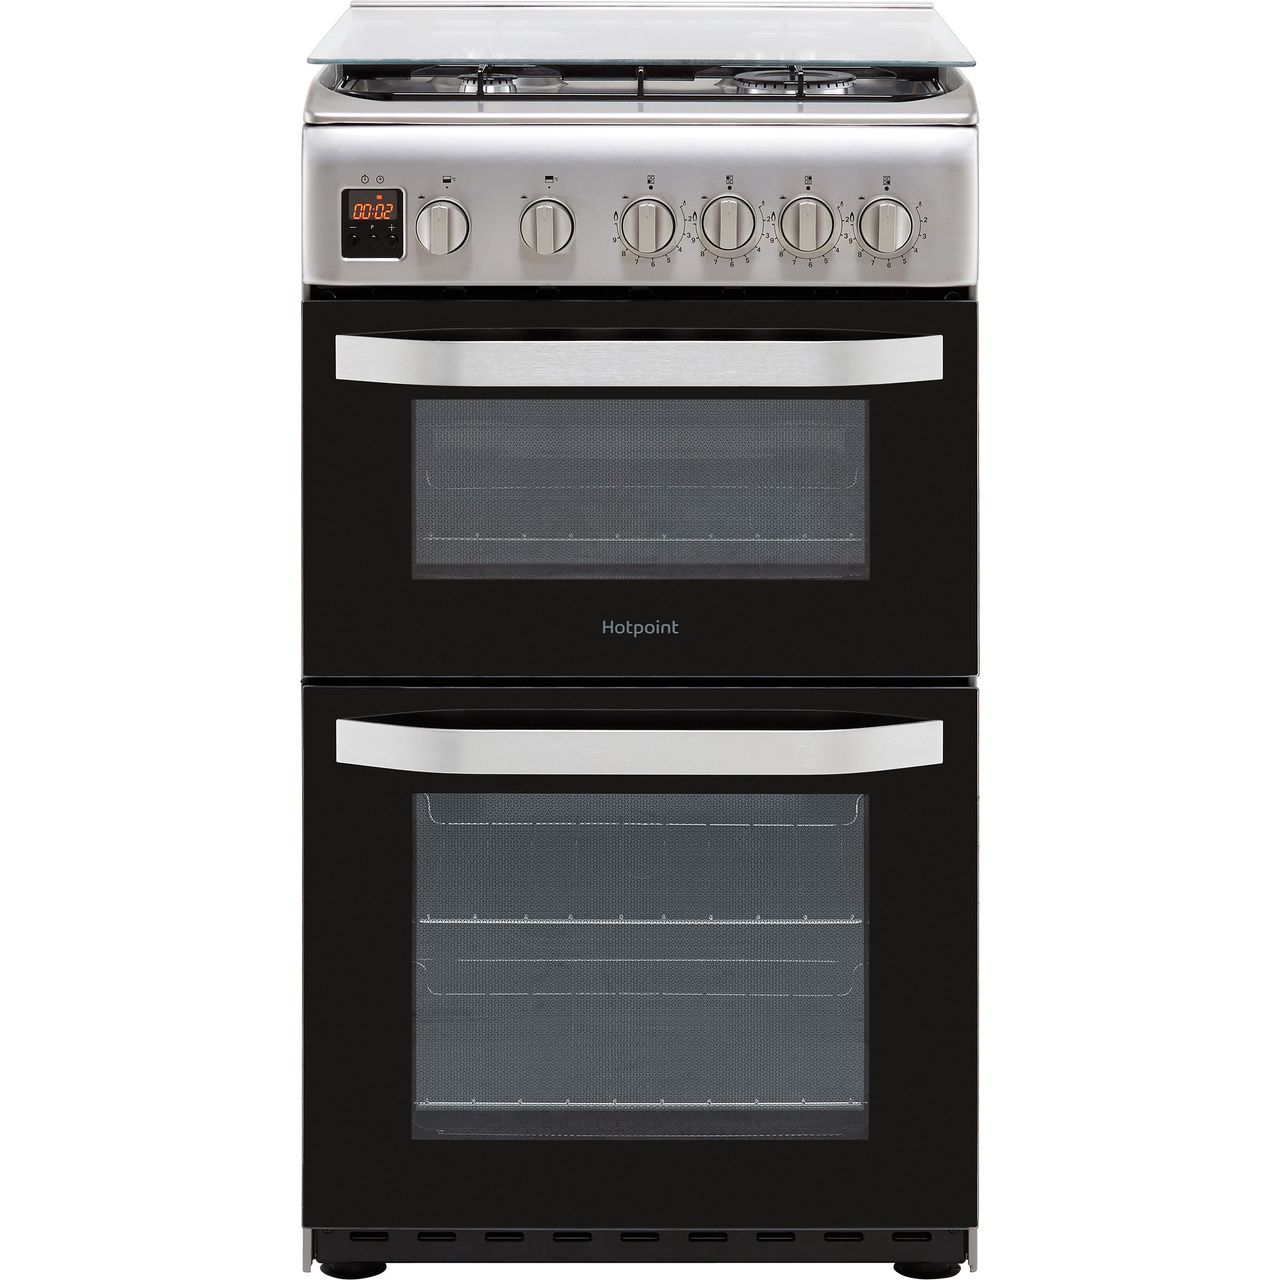 Hotpoint Cloe HD5G00CCX 50cm Gas Cooker with Full Width Gas Grill Review